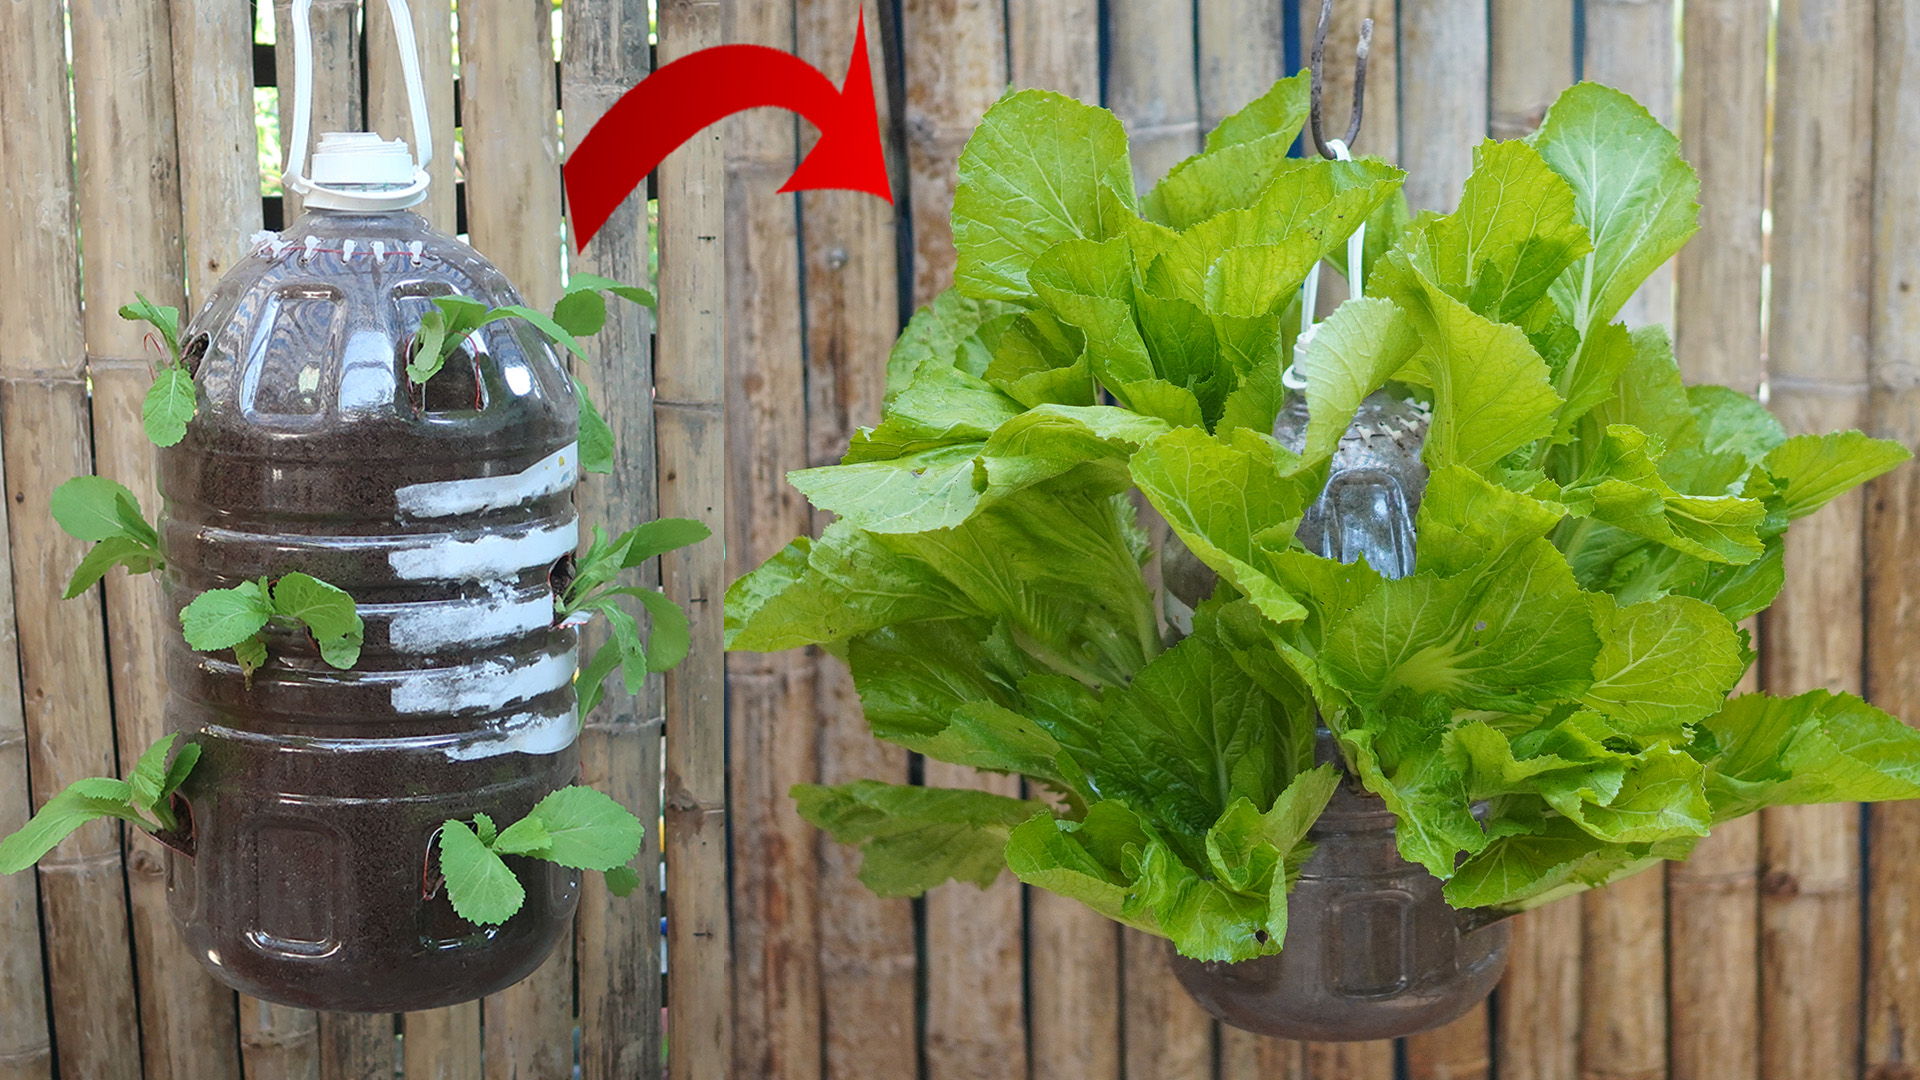 Hanging Garden To Grow Vegetables At Home Created From Plastic Bottles